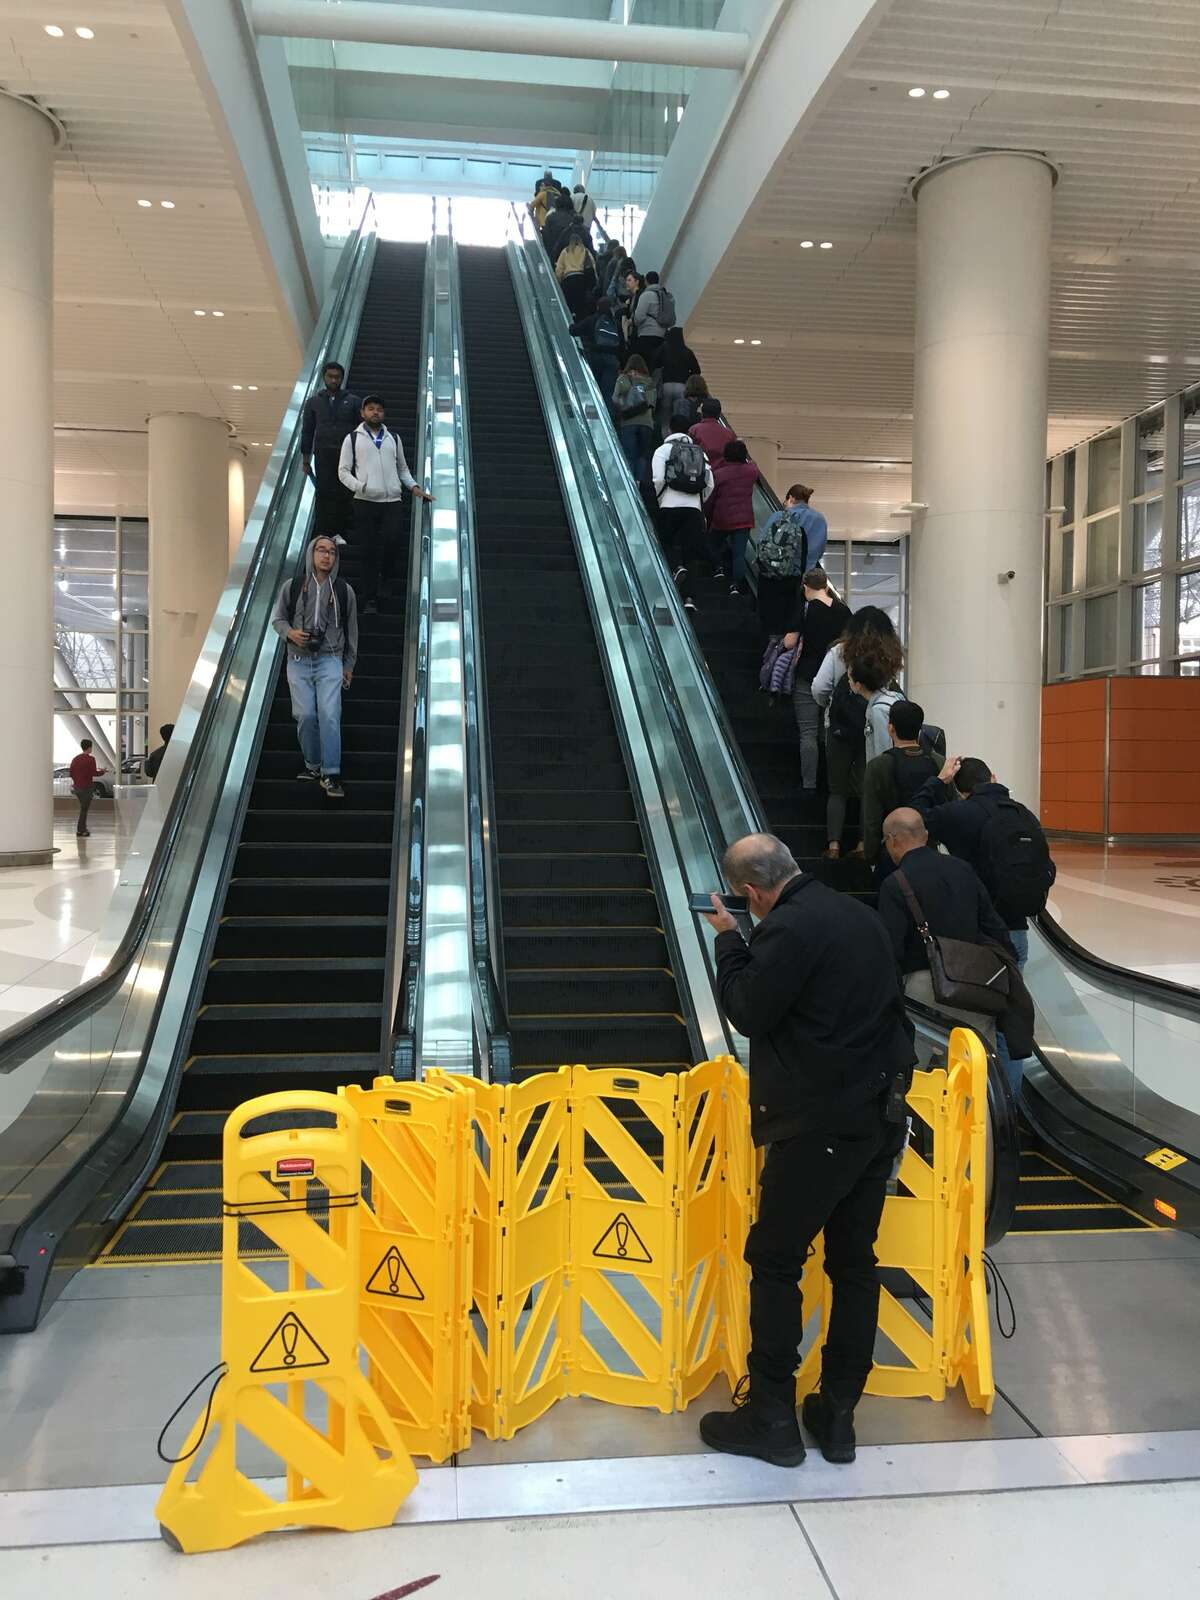 Twitter user @suldrew snapped a photo of an out-of-service escalator at the new Transbay Transit Center on Tuesday, Aug. 14, 2018.